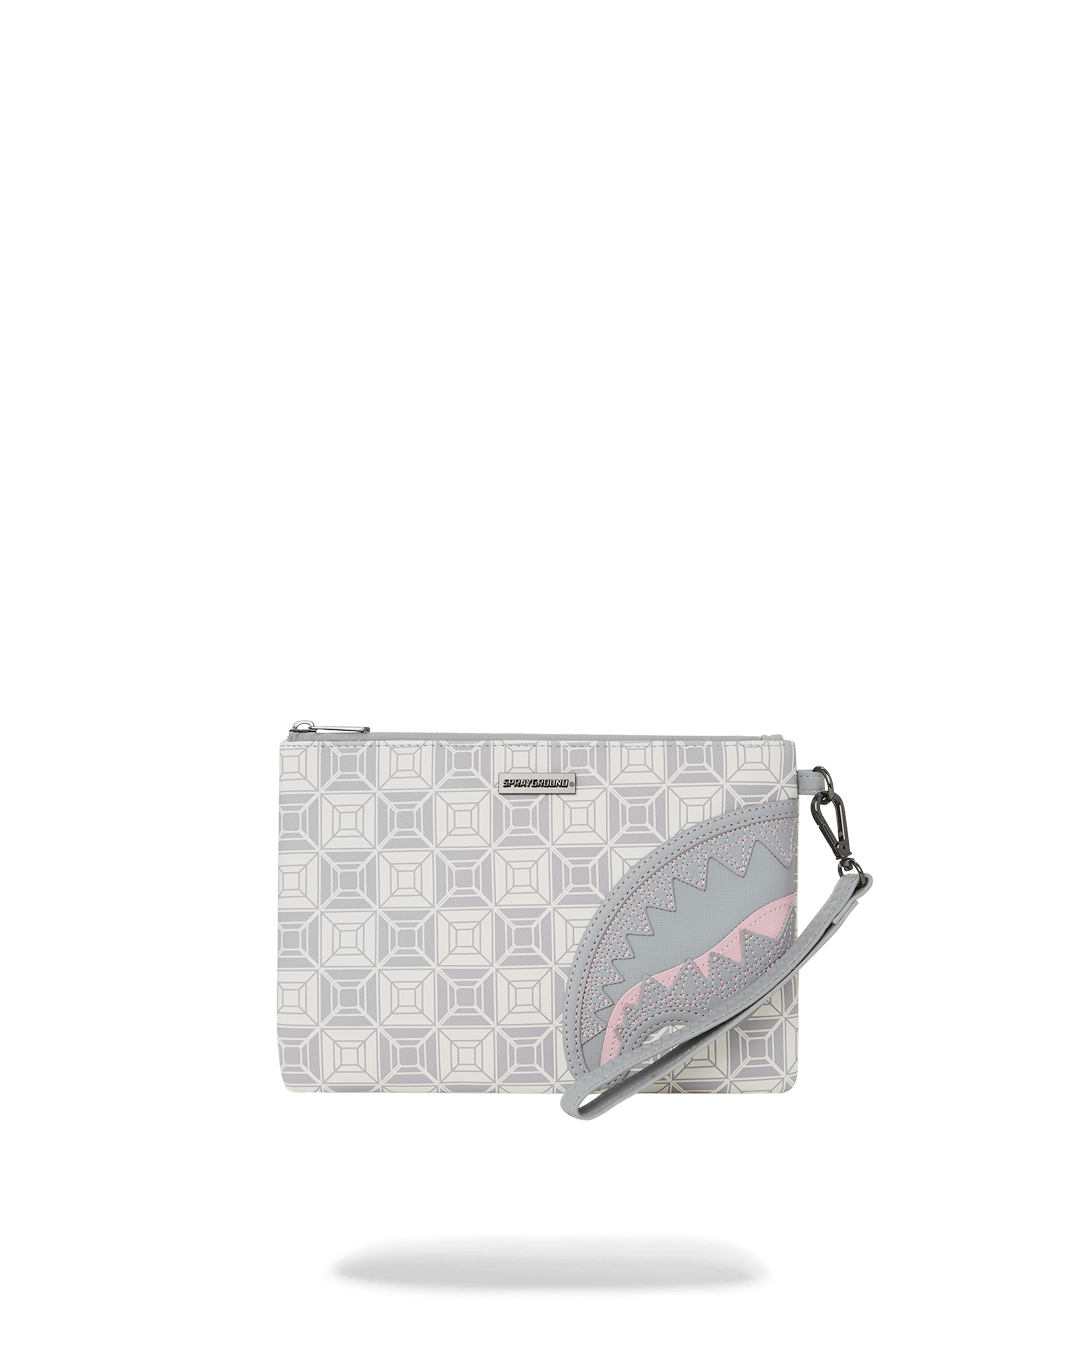 SPRAYGROUND® POUCHETTE A.I.8 AFRICAN INTELLIGENCE BOOKED & BUSY CROSSOVER CLUTCH